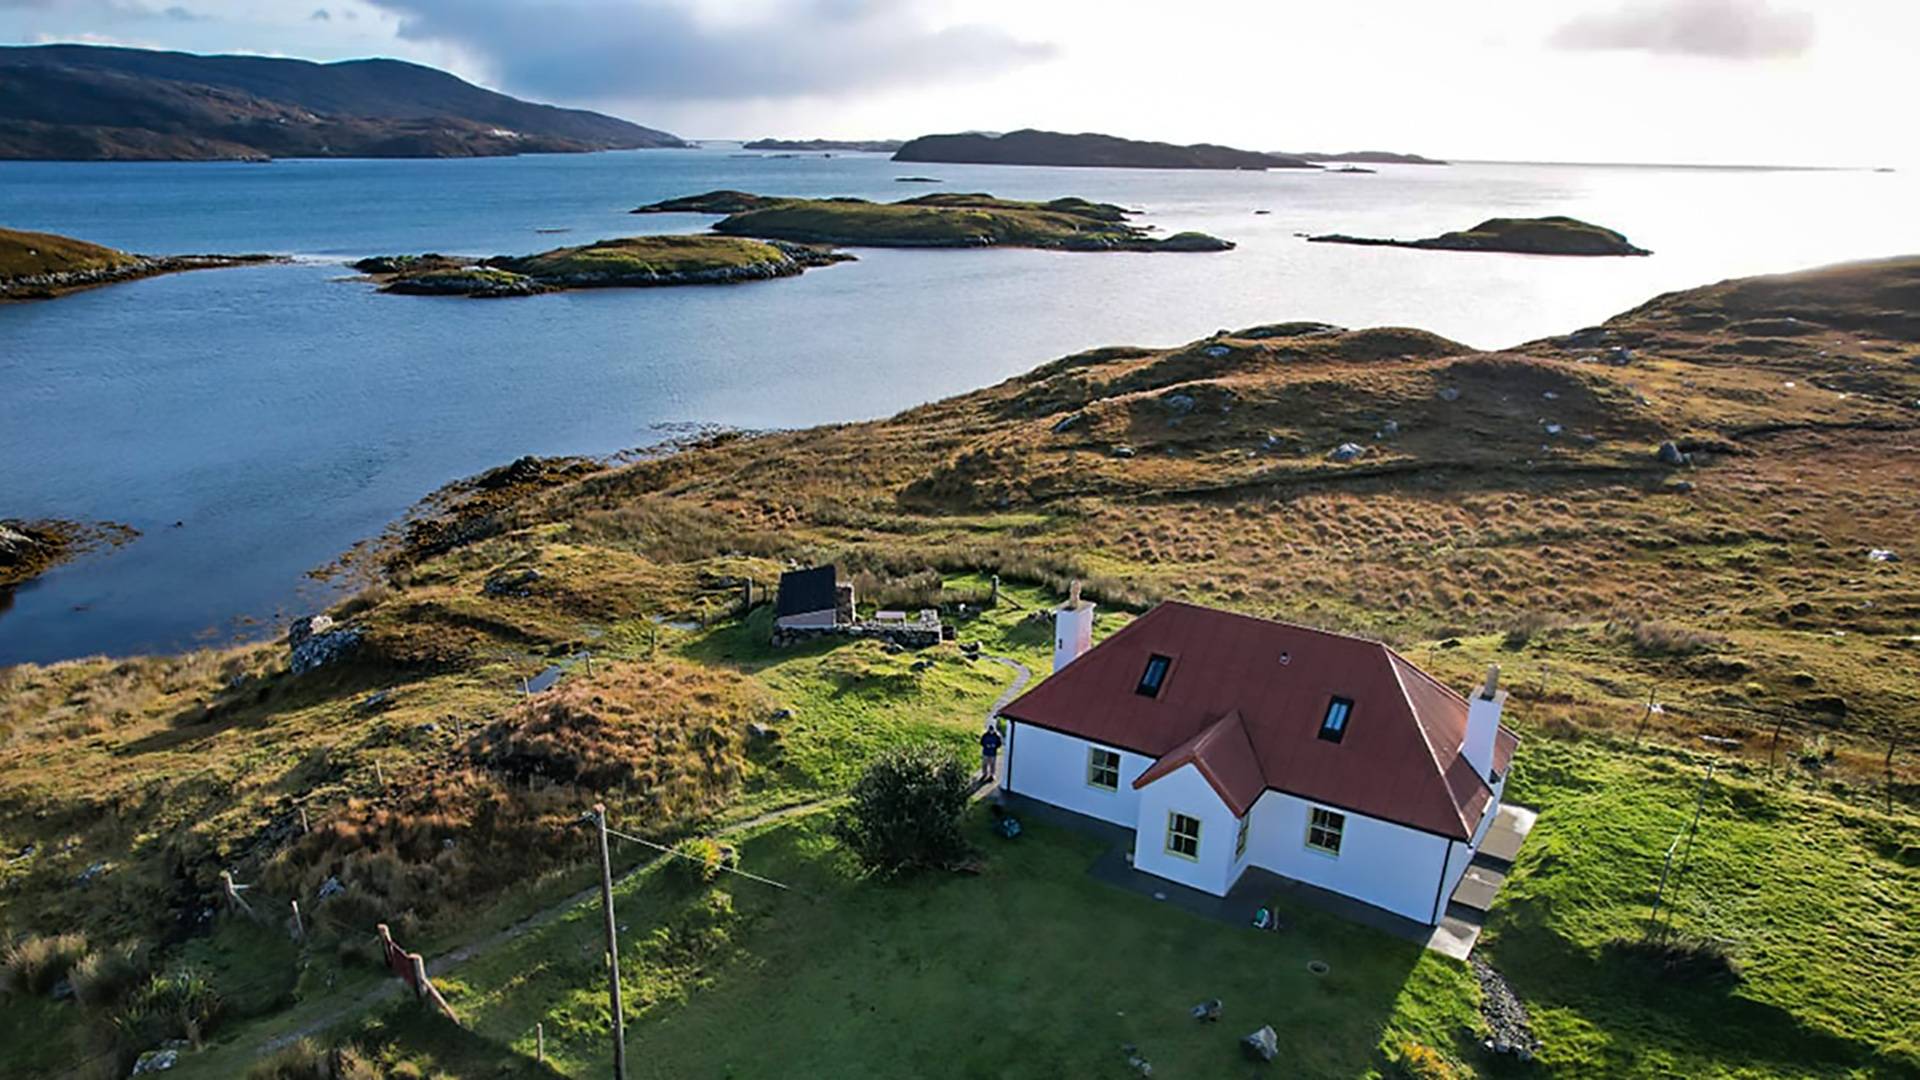 Red House, Harris and Loch Tarbert.